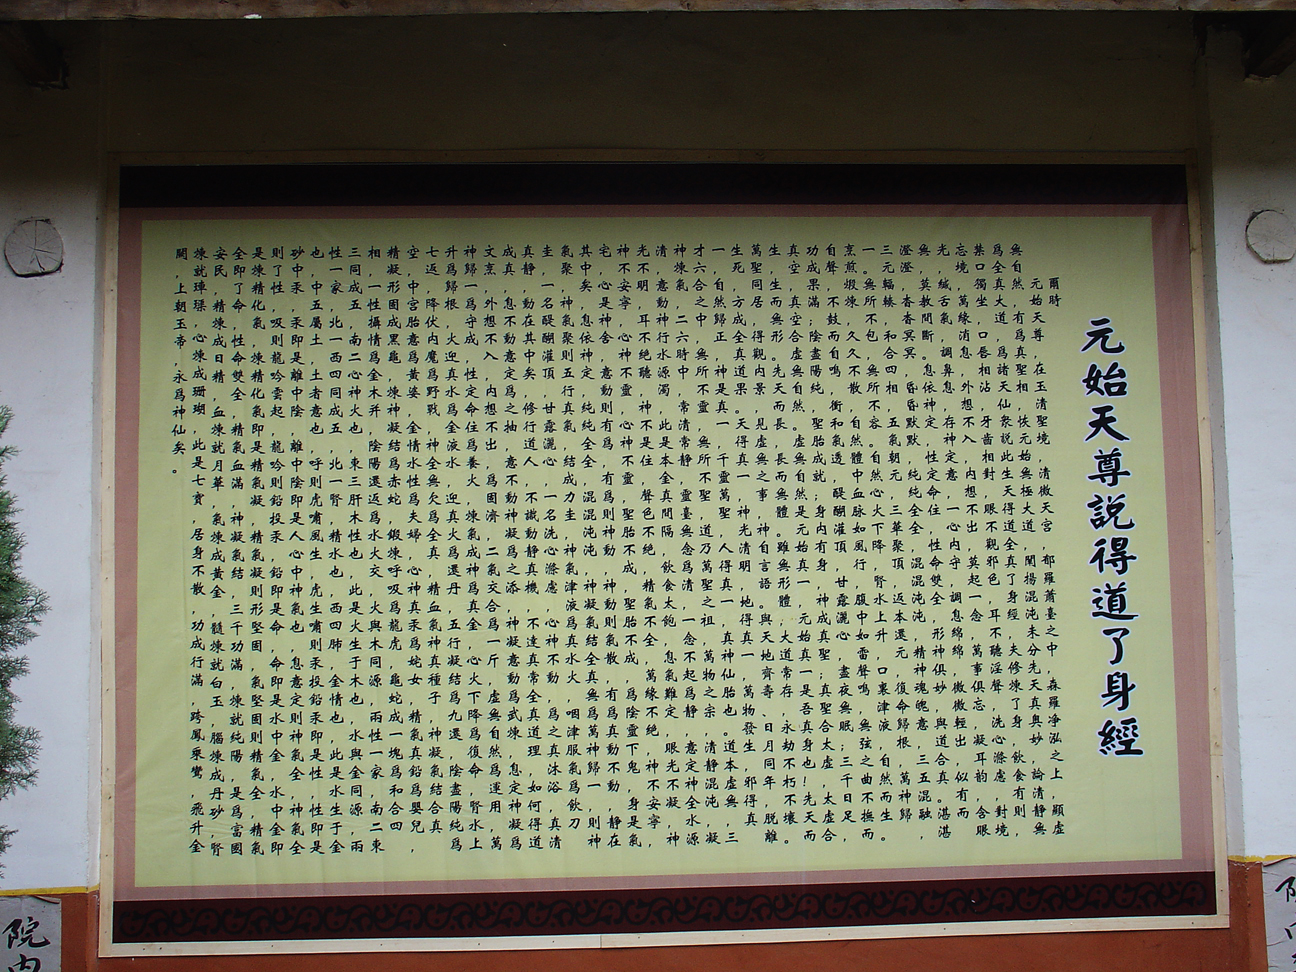 A wall with a Chinese inscription